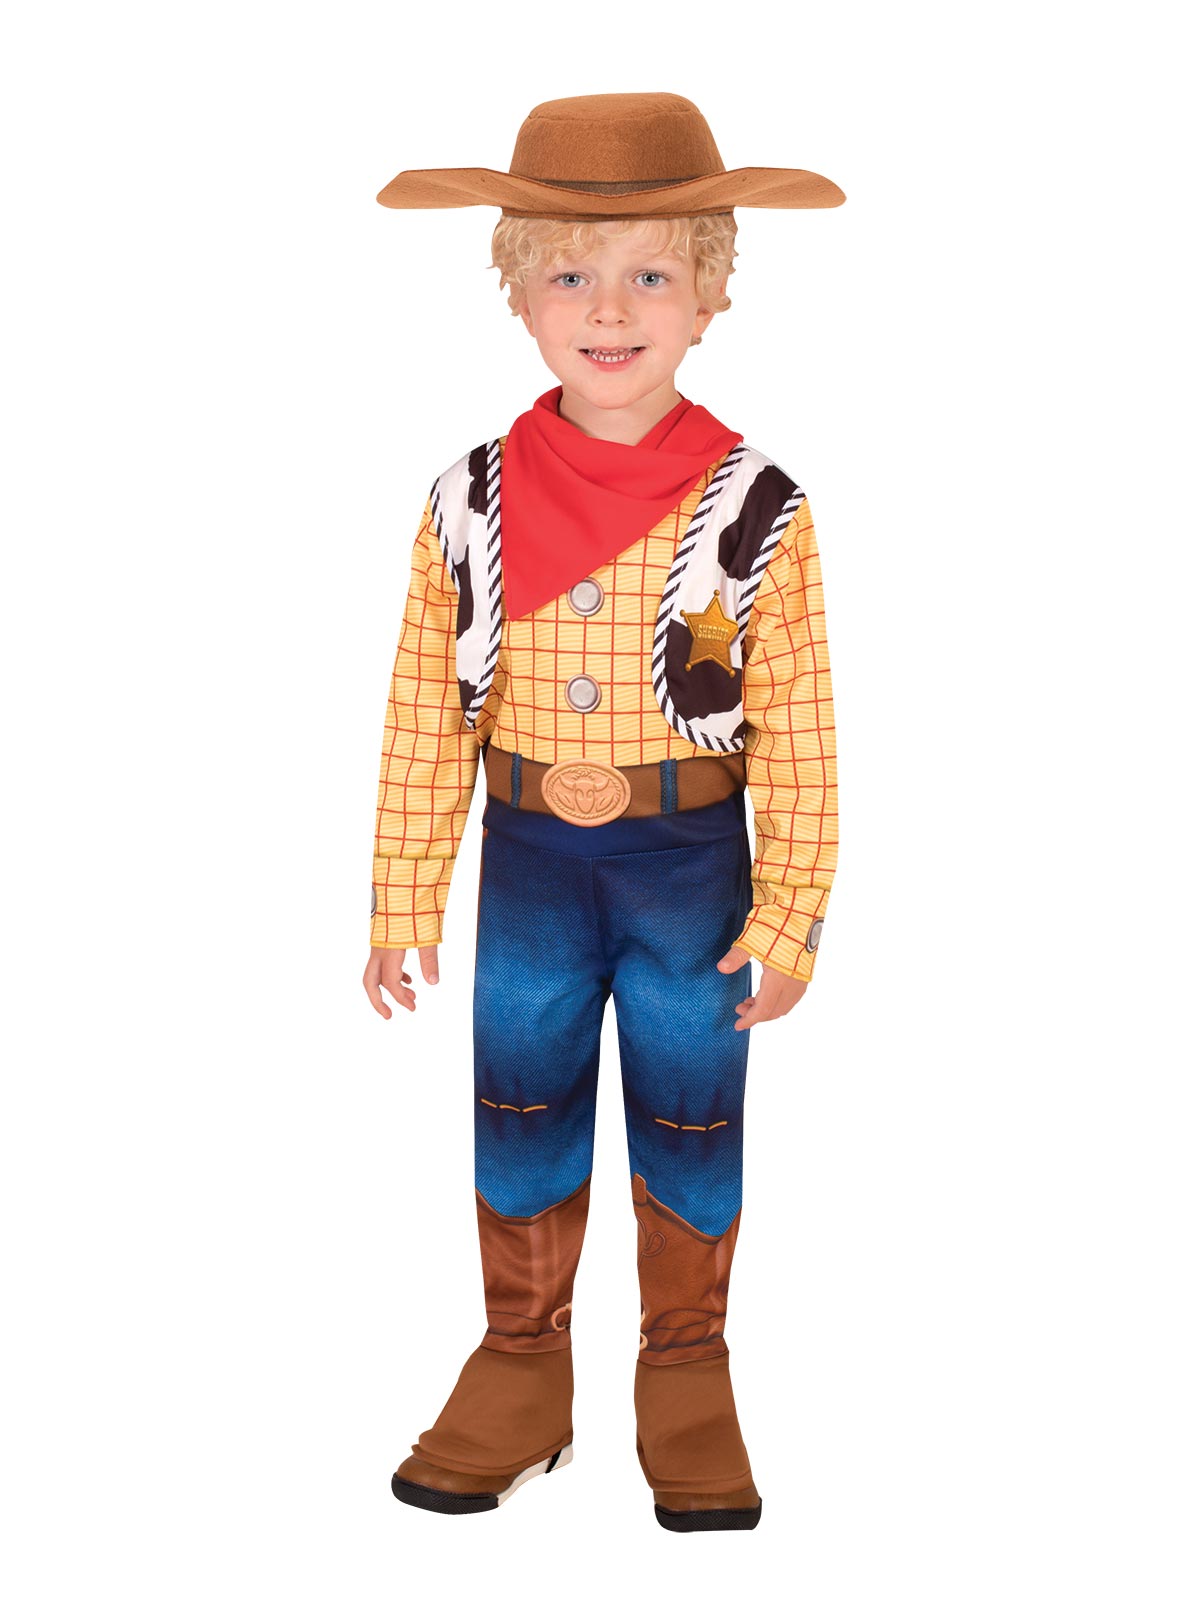 Woody Deluxe Toy Story 4 Child Deluxe Costume Disny Prixcar Licensed